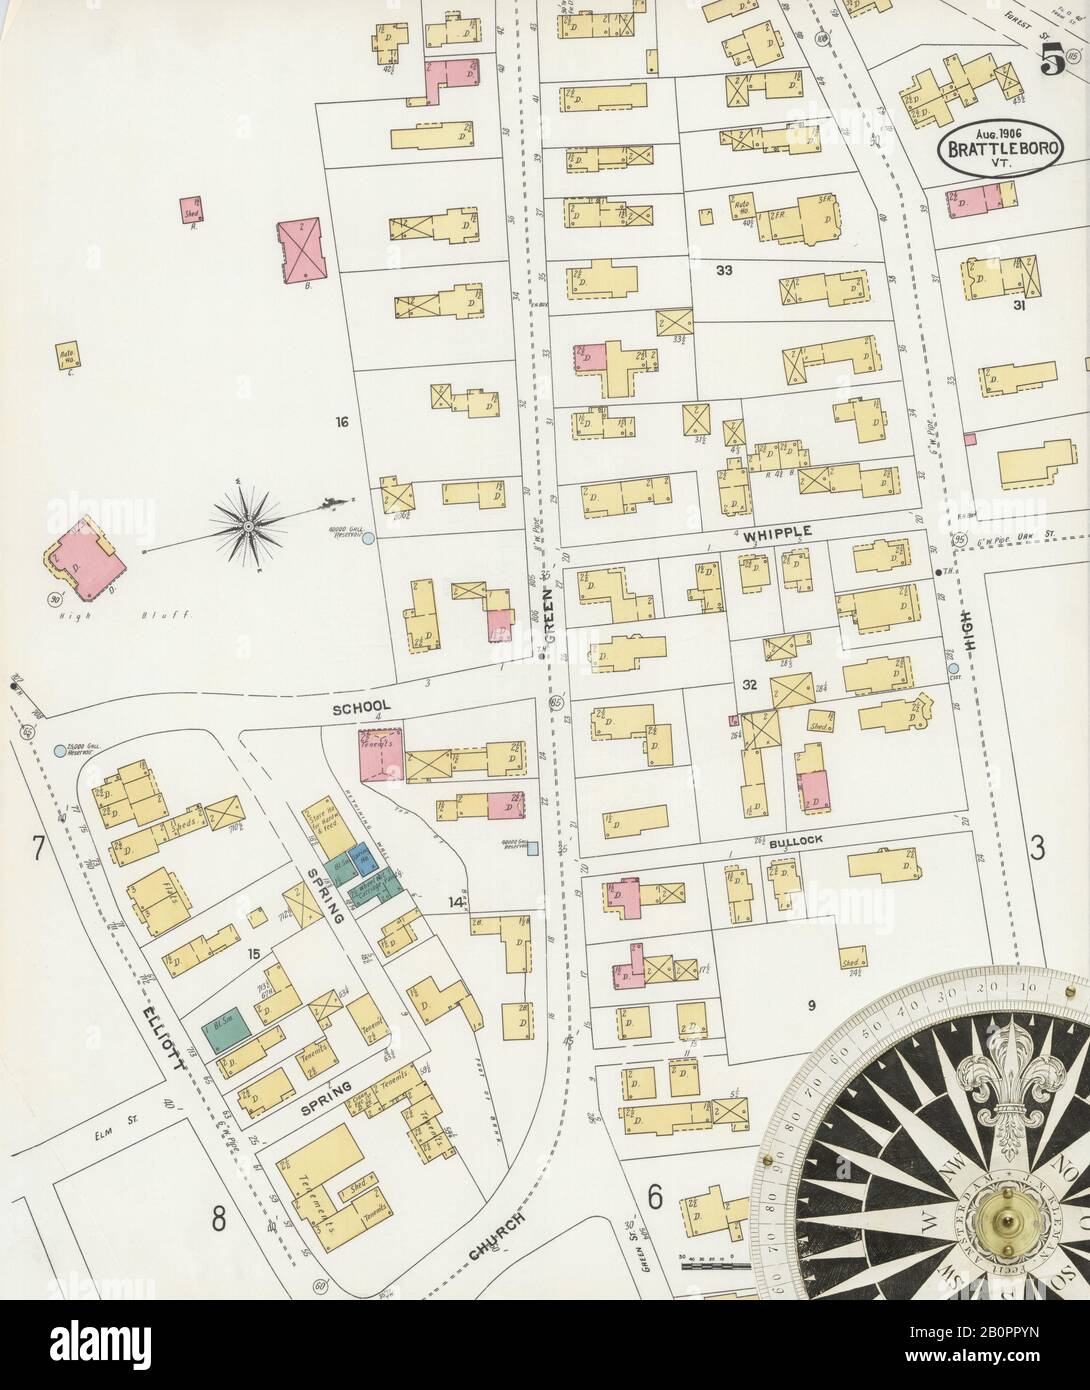 Image 5 of Sanborn Fire Insurance Map from Brattleboro, Windham County, Vermont. Aug 1906. 14 Sheet(s), America, street map with a Nineteenth Century compass Stock Photo